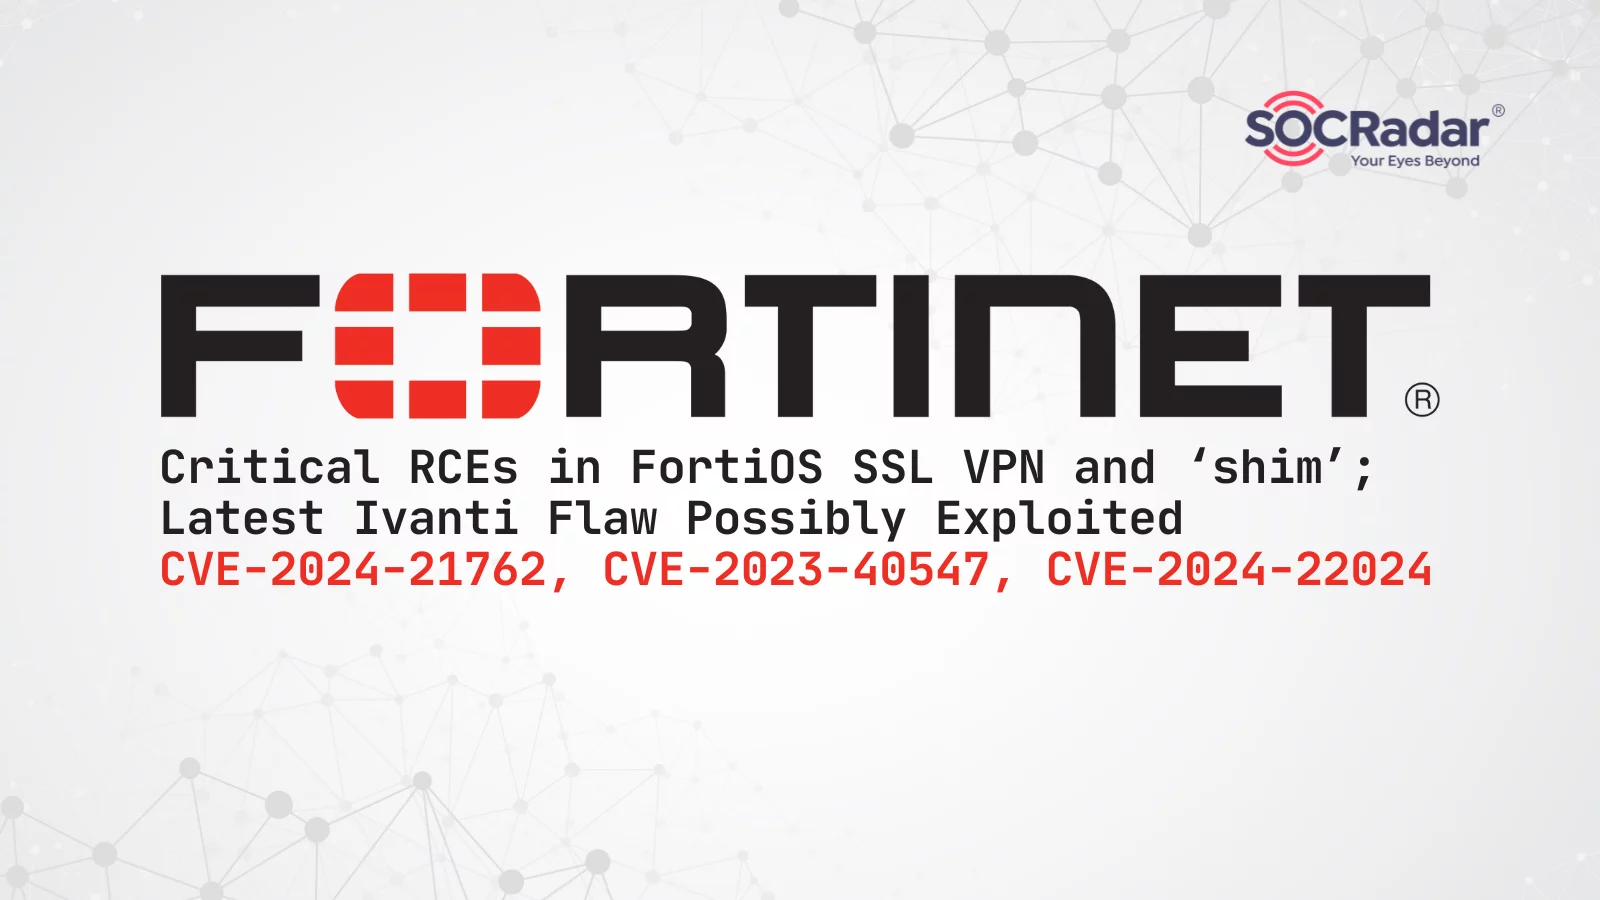 RCEs in FortiOS SSL VPN, ‘shim’; Latest Ivanti Flaw Possibly Exploited